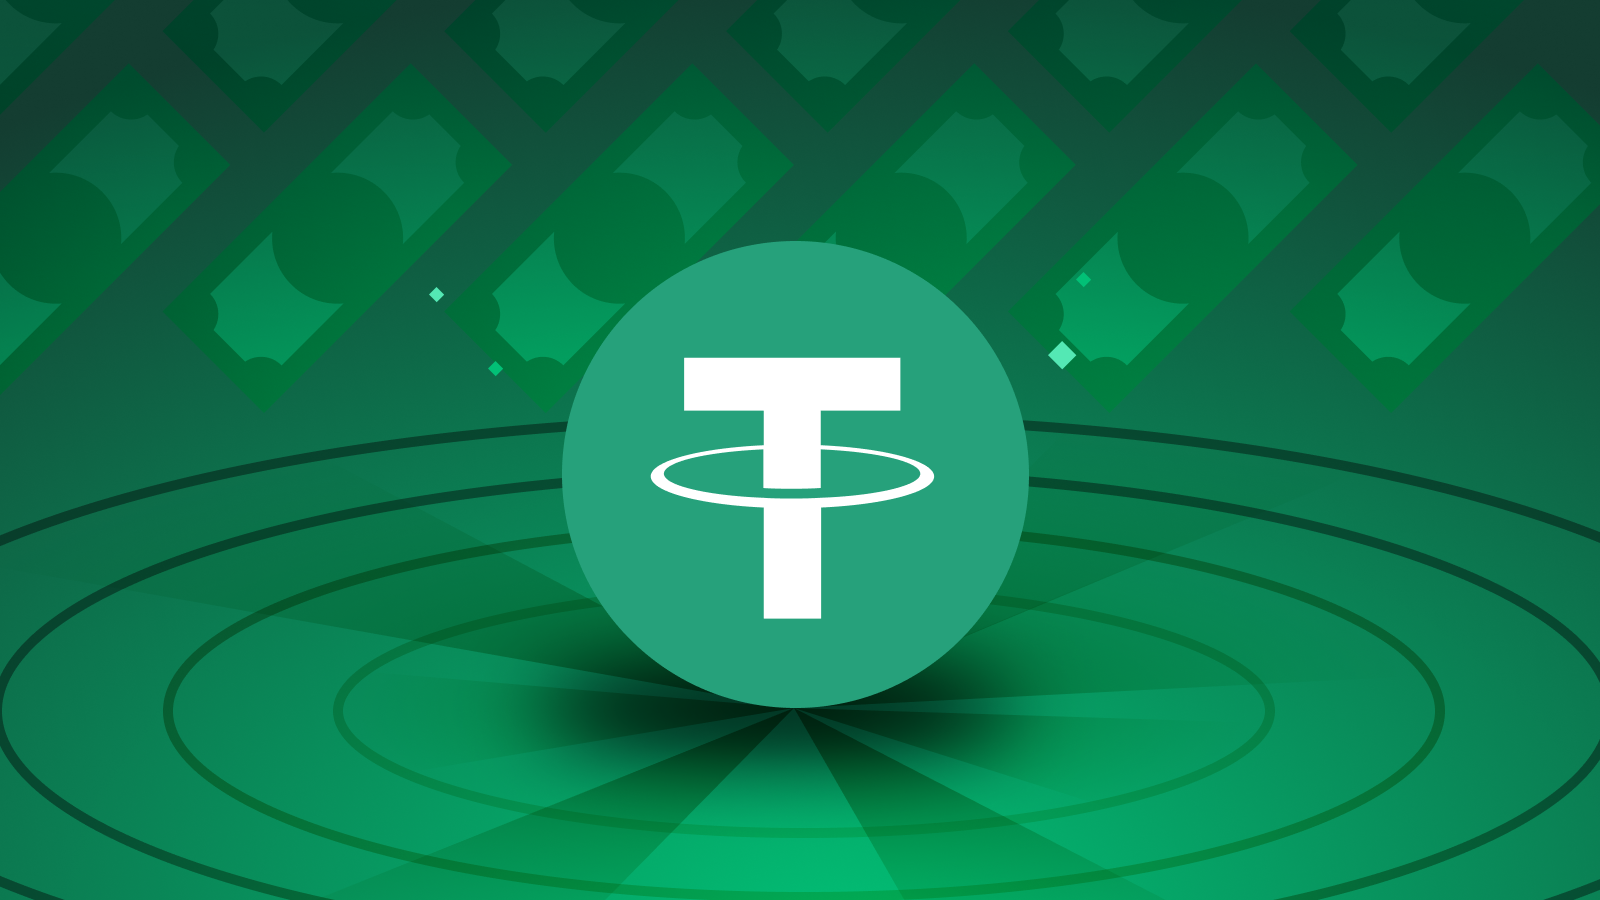 The Unexpected Shake-Up in Tether's Stability Ignites DeFi Trading Frenzy